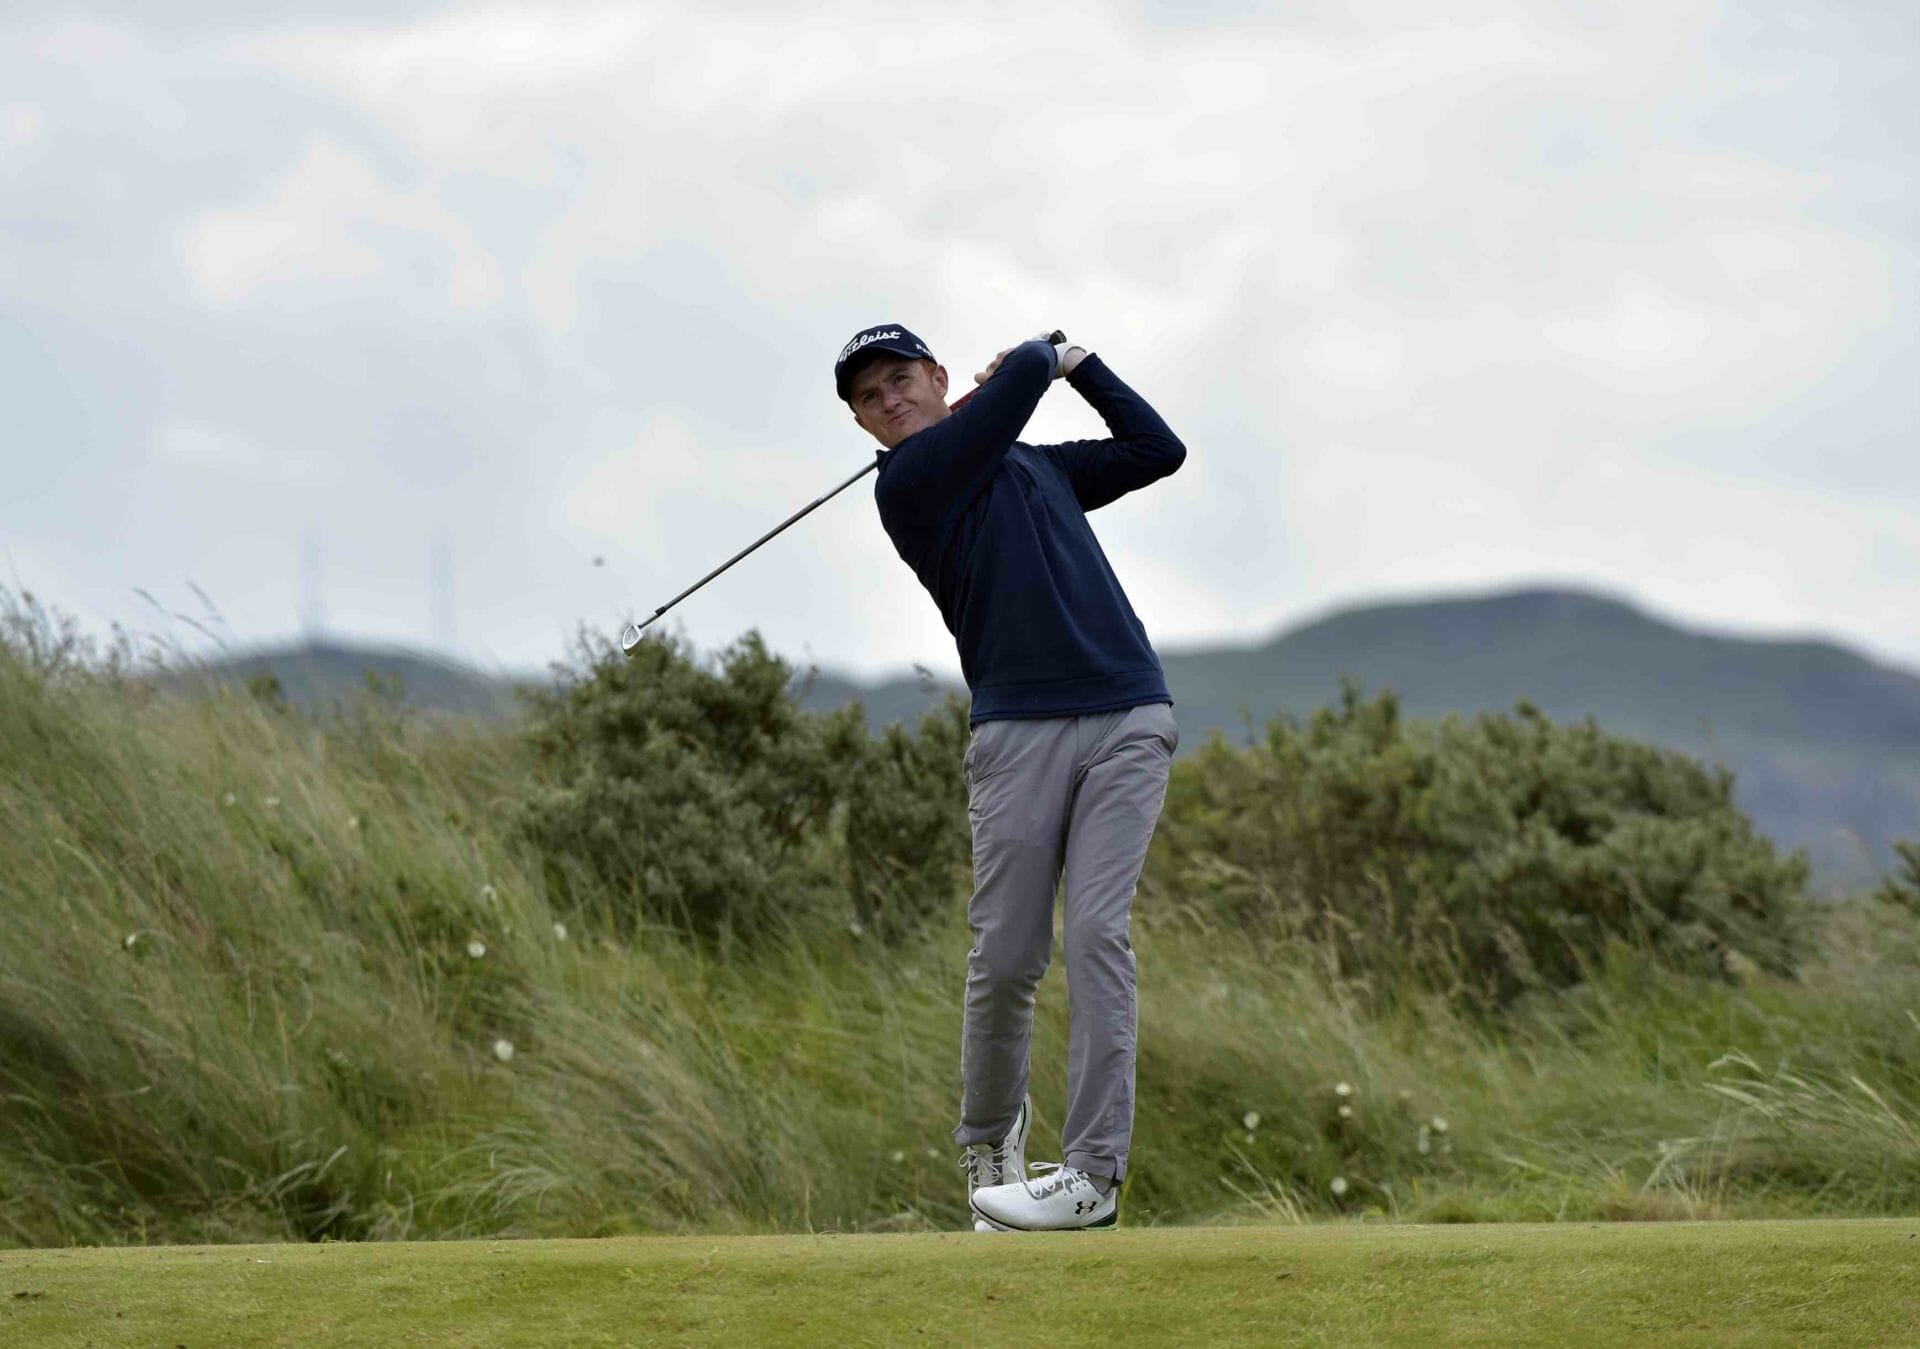 Mullarney and Sugrue carry Irish hopes in last 16 of The Amateur Championship at Portmarnock